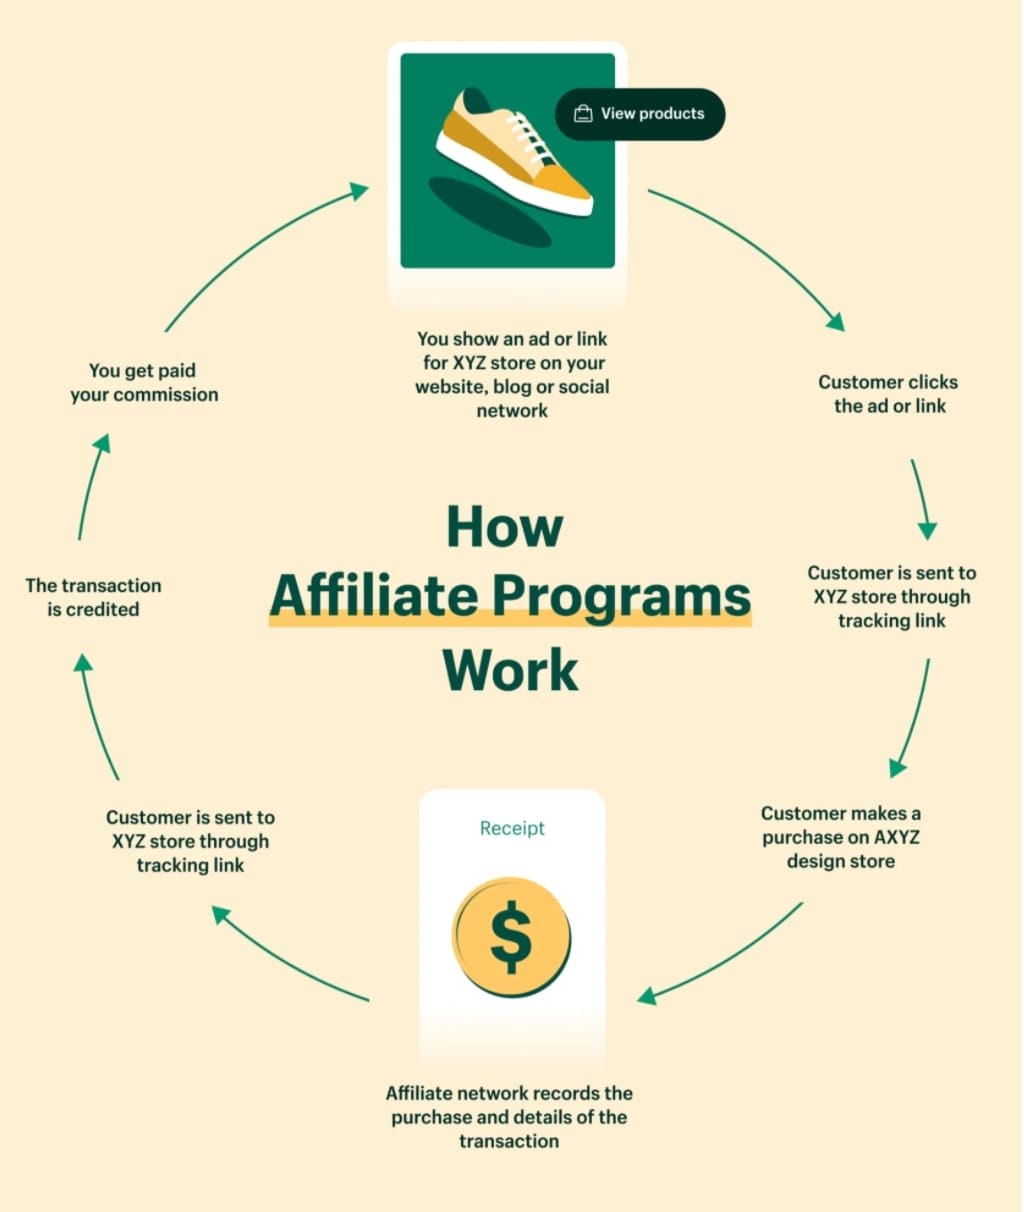 How to Successfully Launch a New Product Using Affiliate Marketing